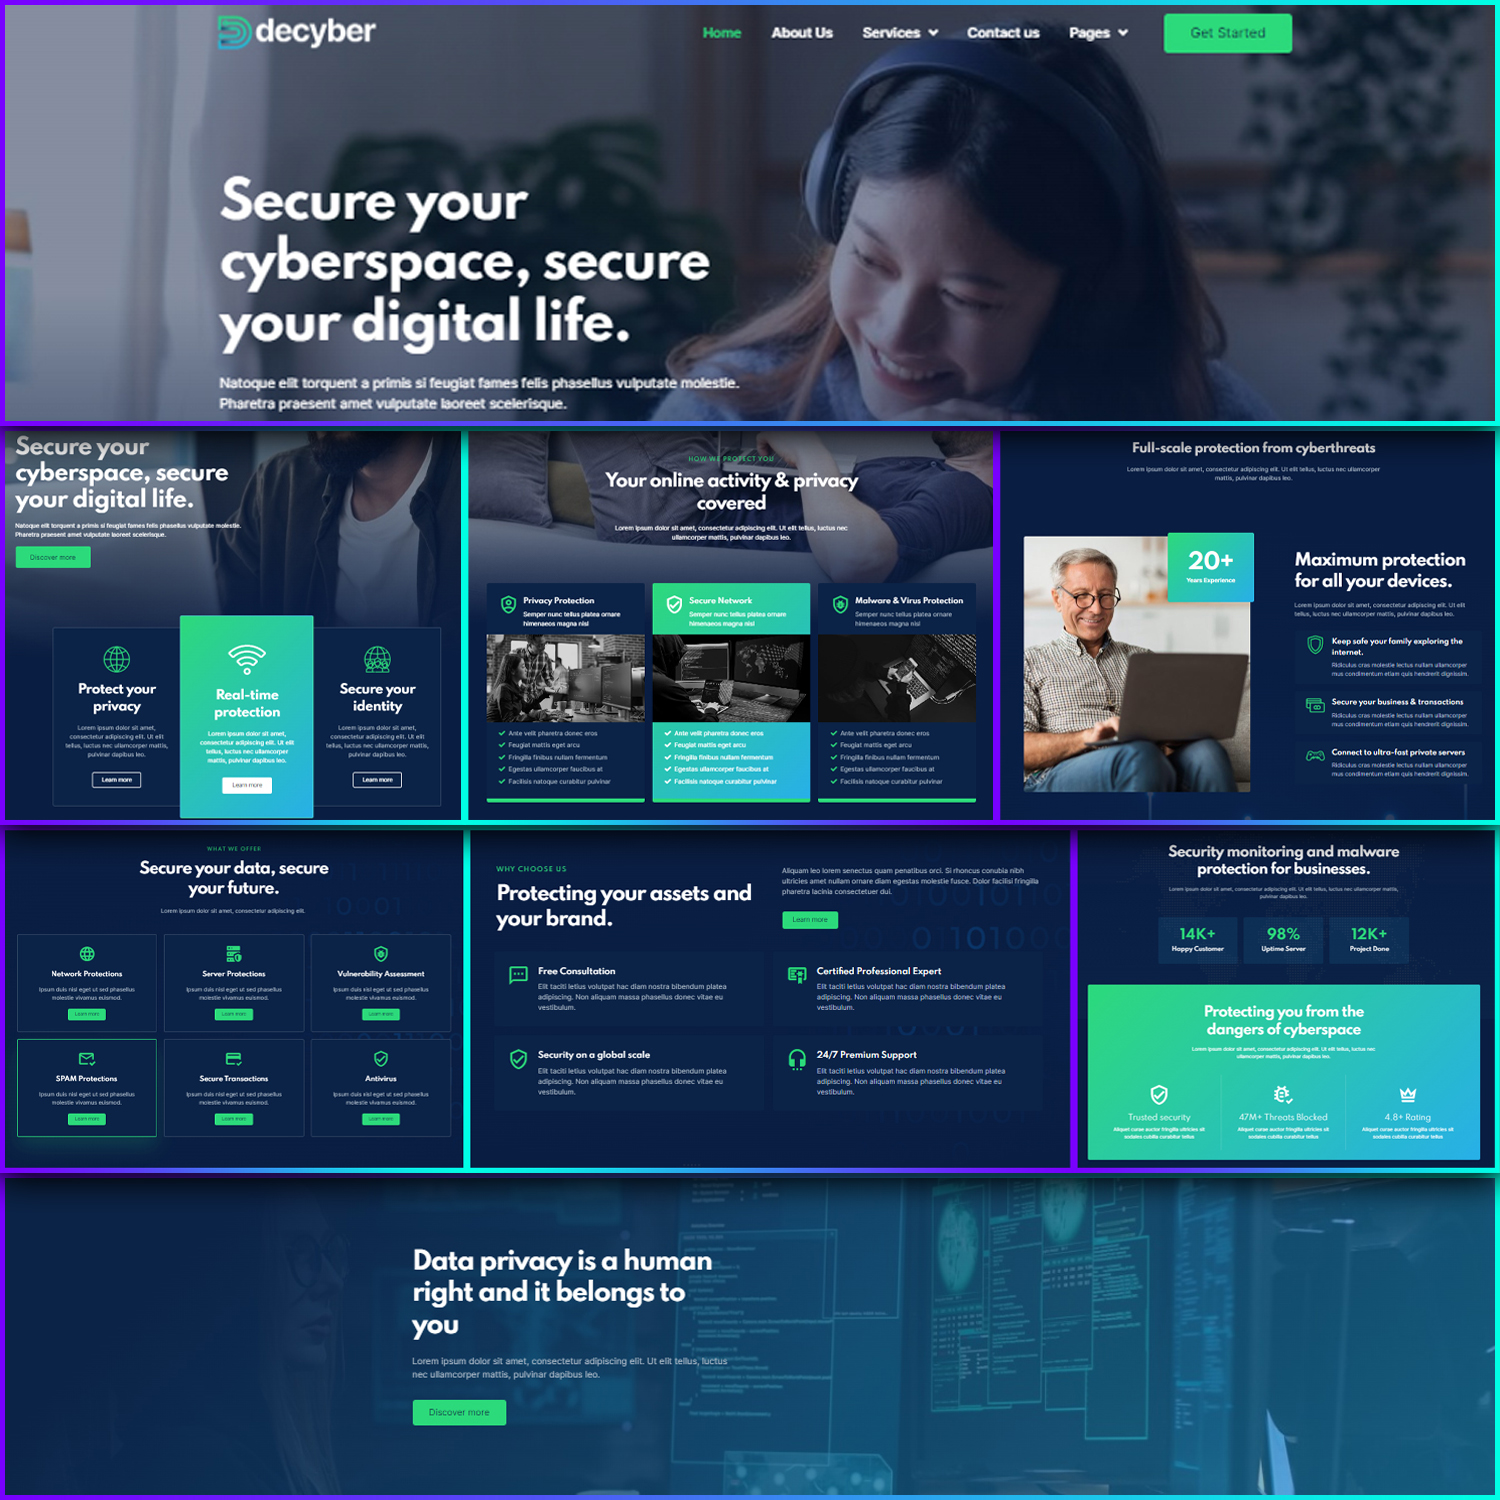 Images preview decyber cyber security services elementor template kit.